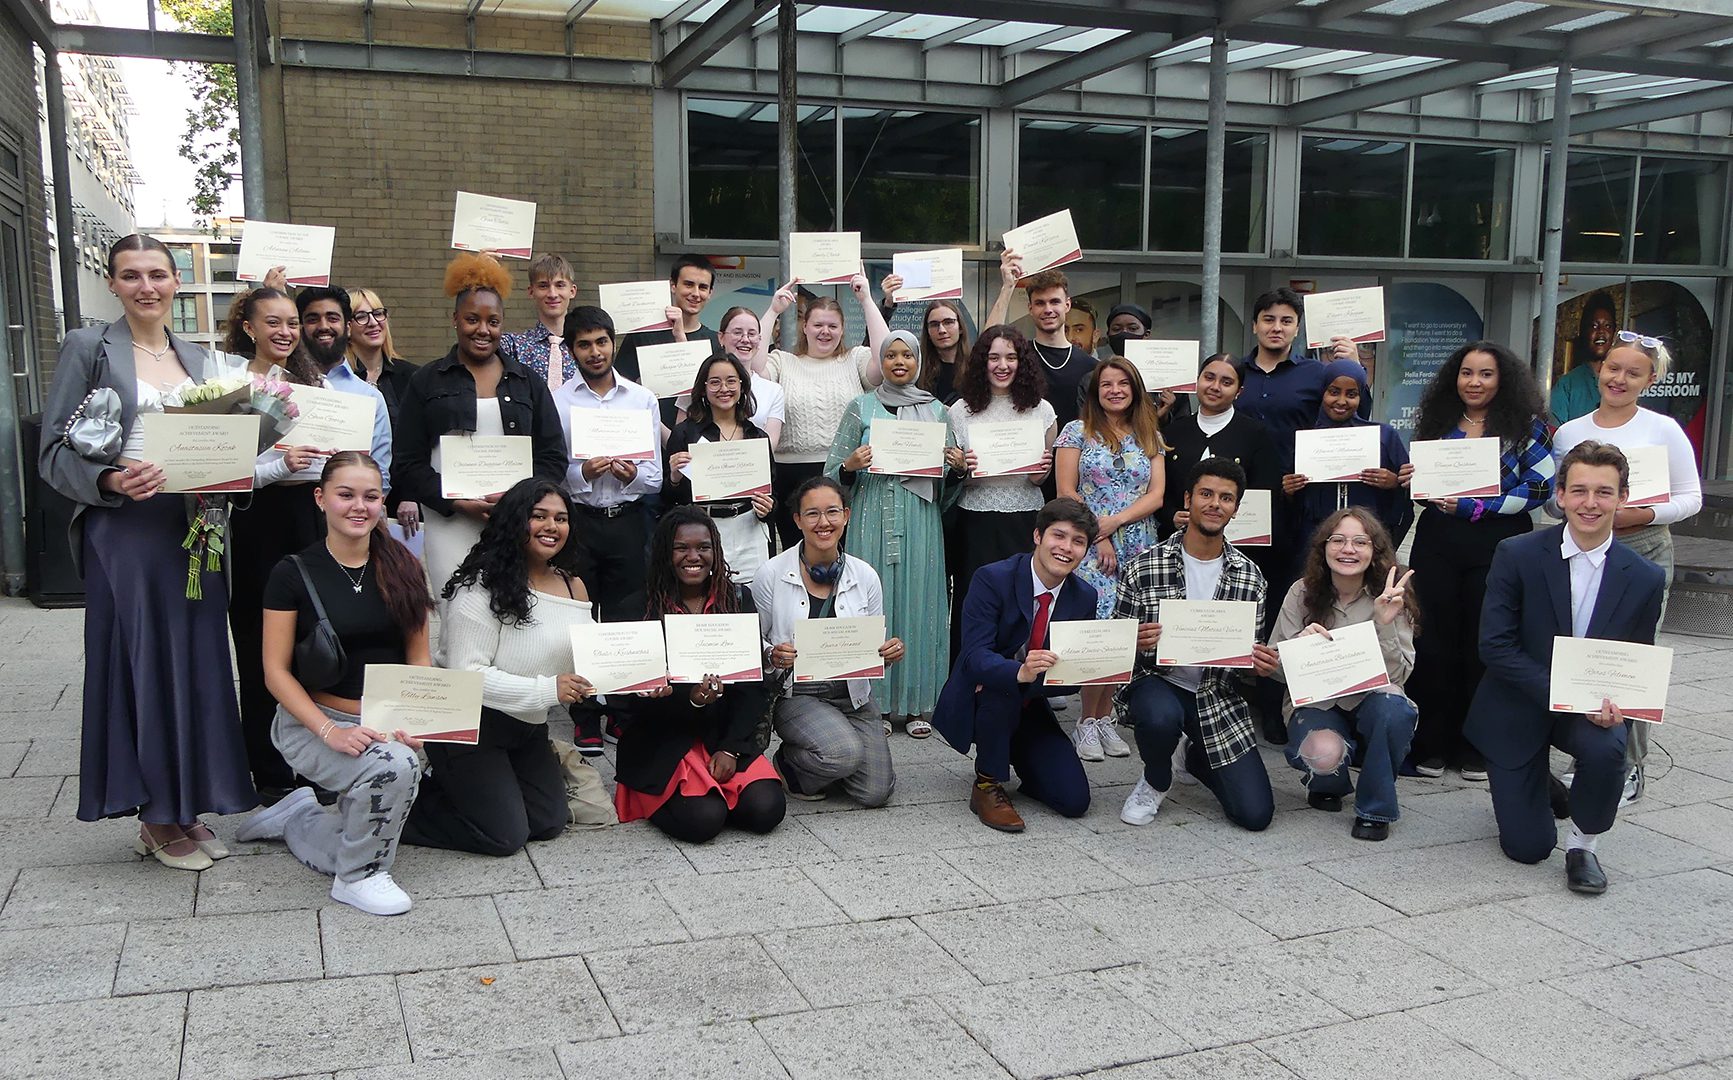 Students honoured for their achievements at CANDI awards ceremony